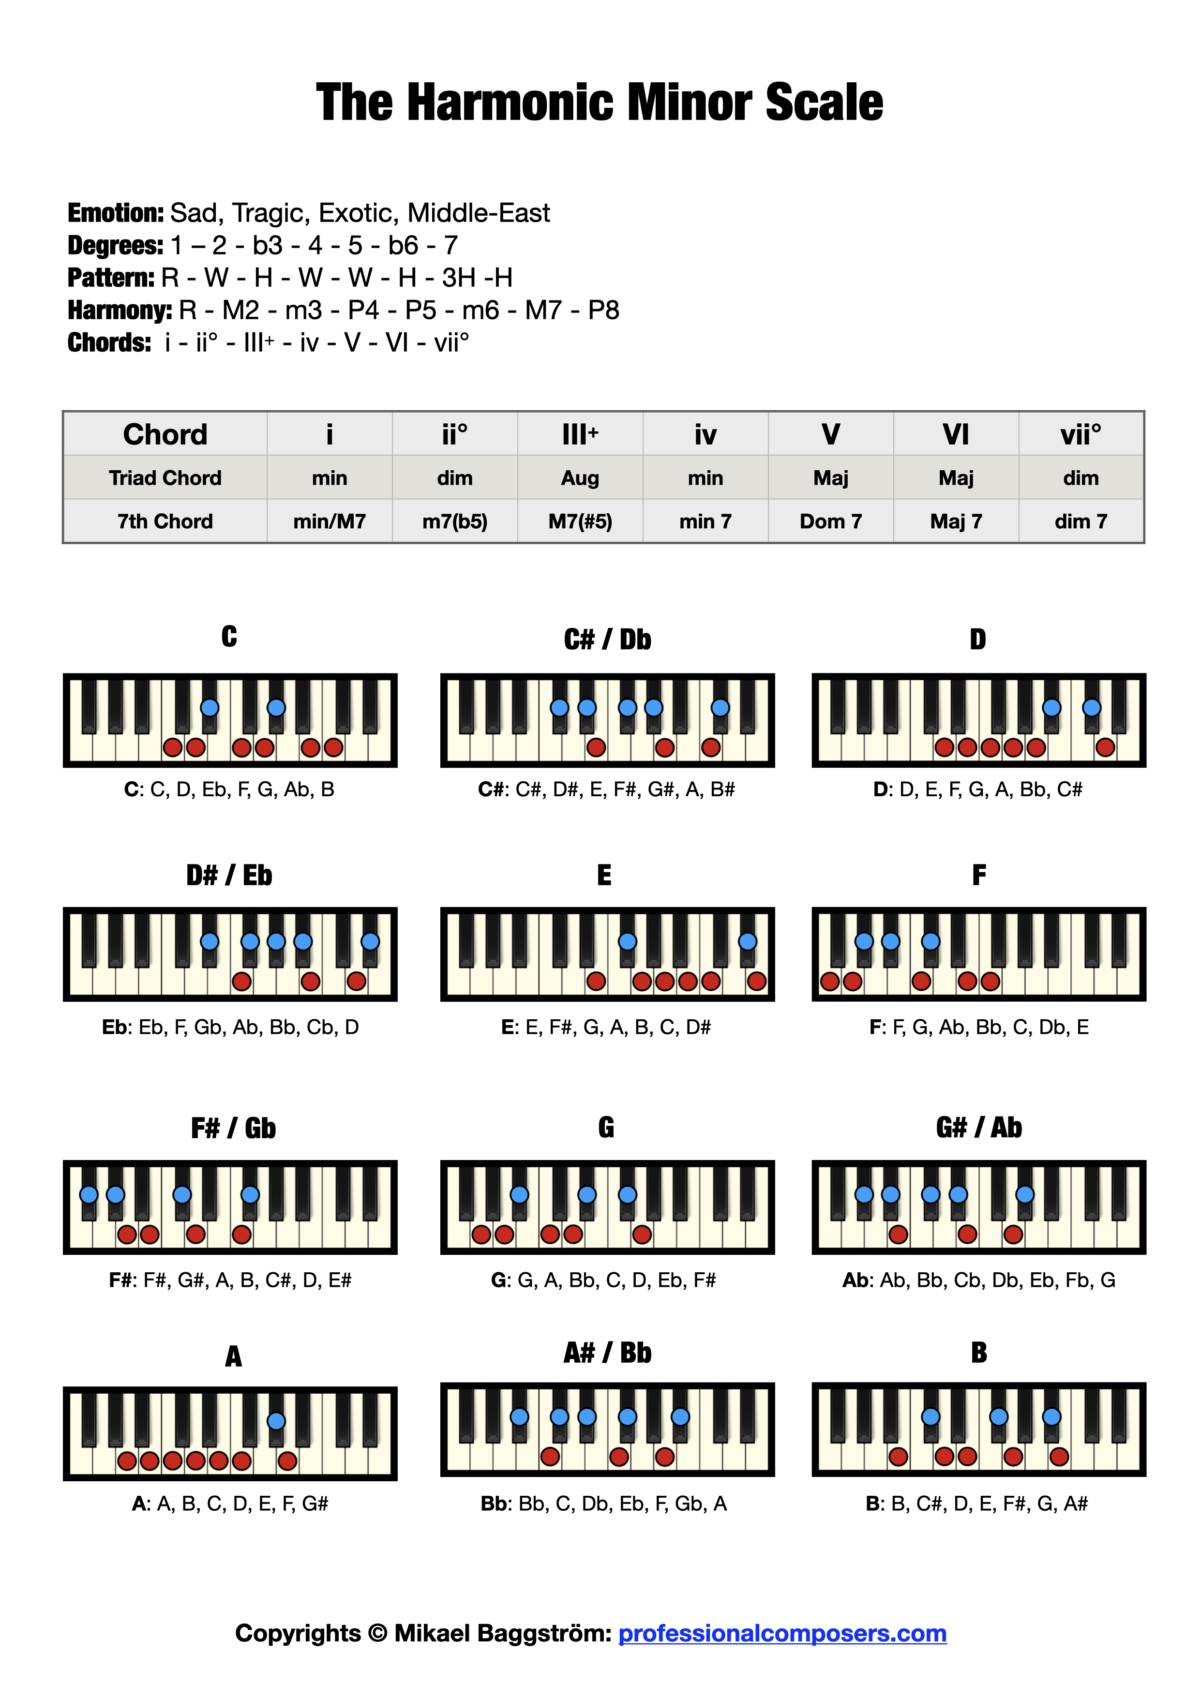 The Harmonic Minor Scale on Piano (Free Chart + Pictures